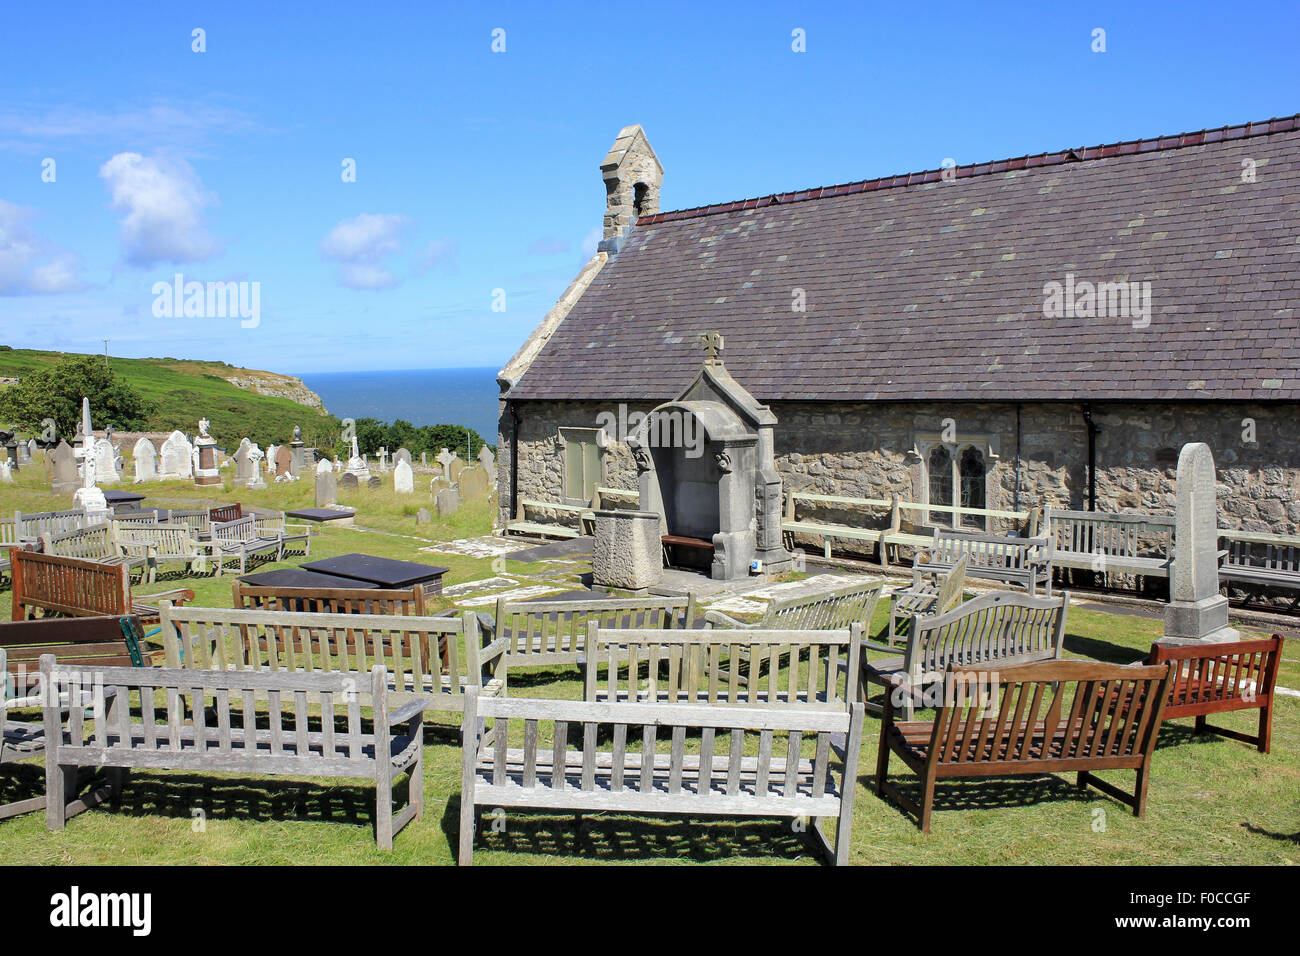 Seating For Open Air Services At St Tudno's Church, Great Orme, Llandudno Stock Photo